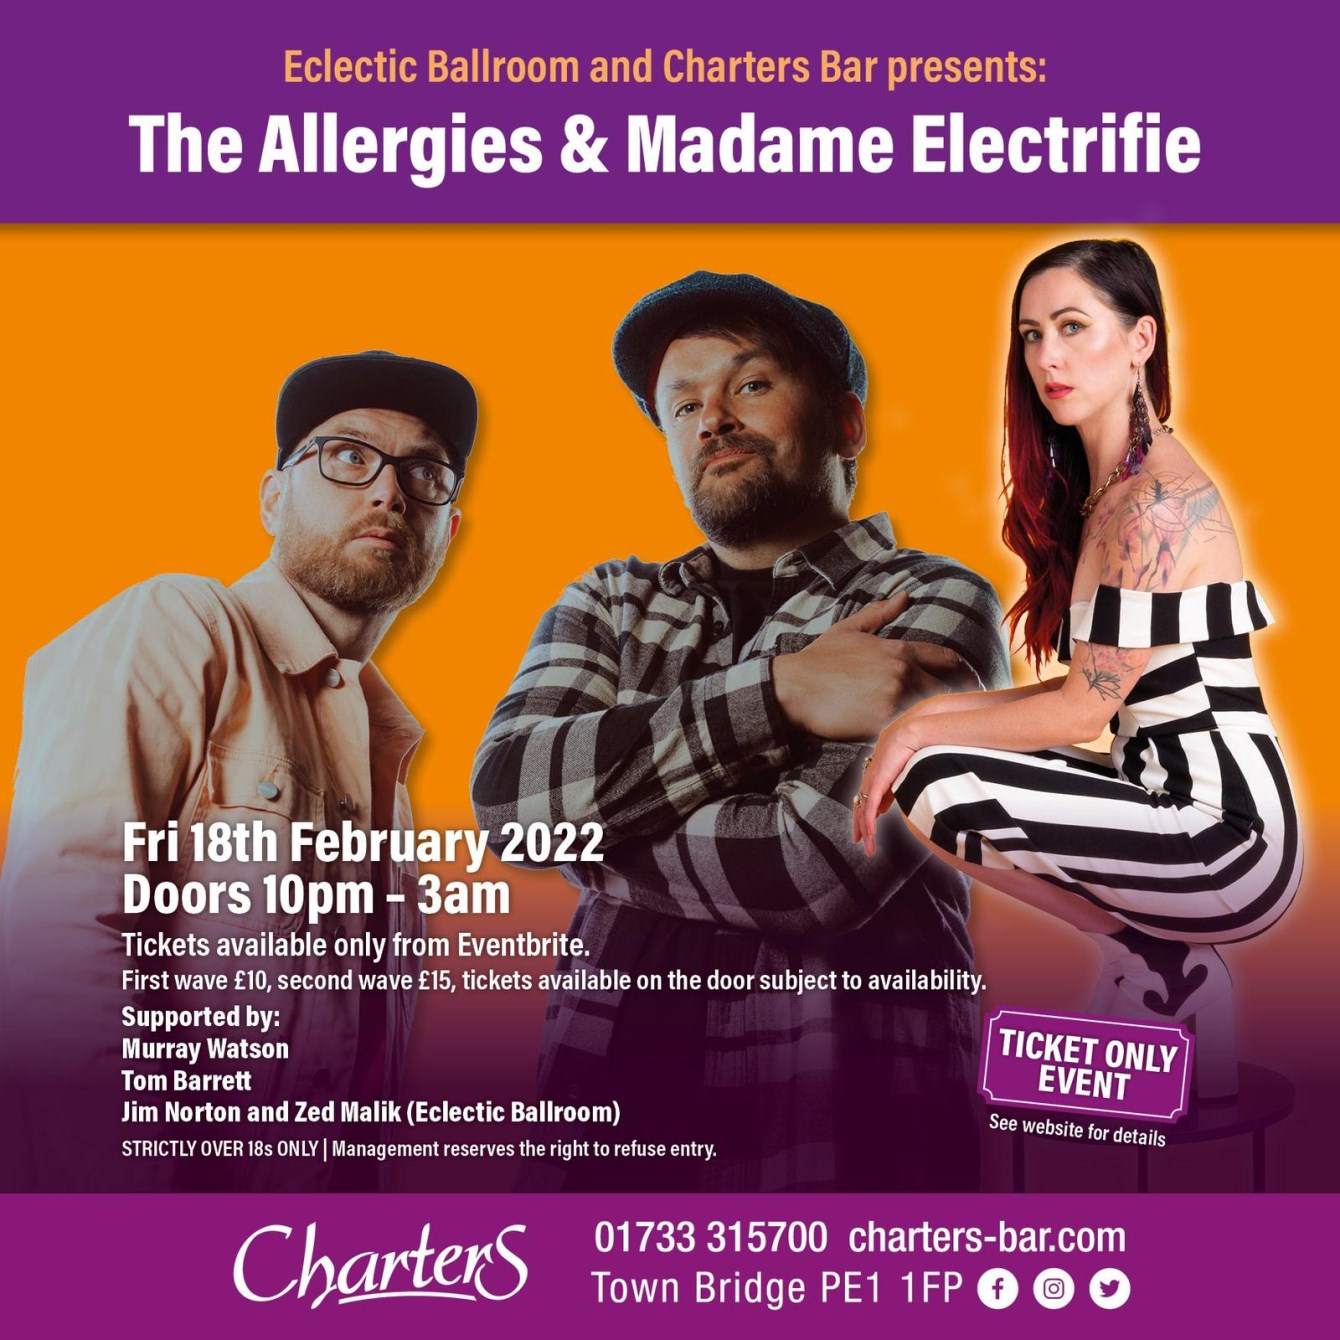 Eclectic Ballroom & Charters Bar present The Allergies and Madame Eclectrfie. - Página trasera